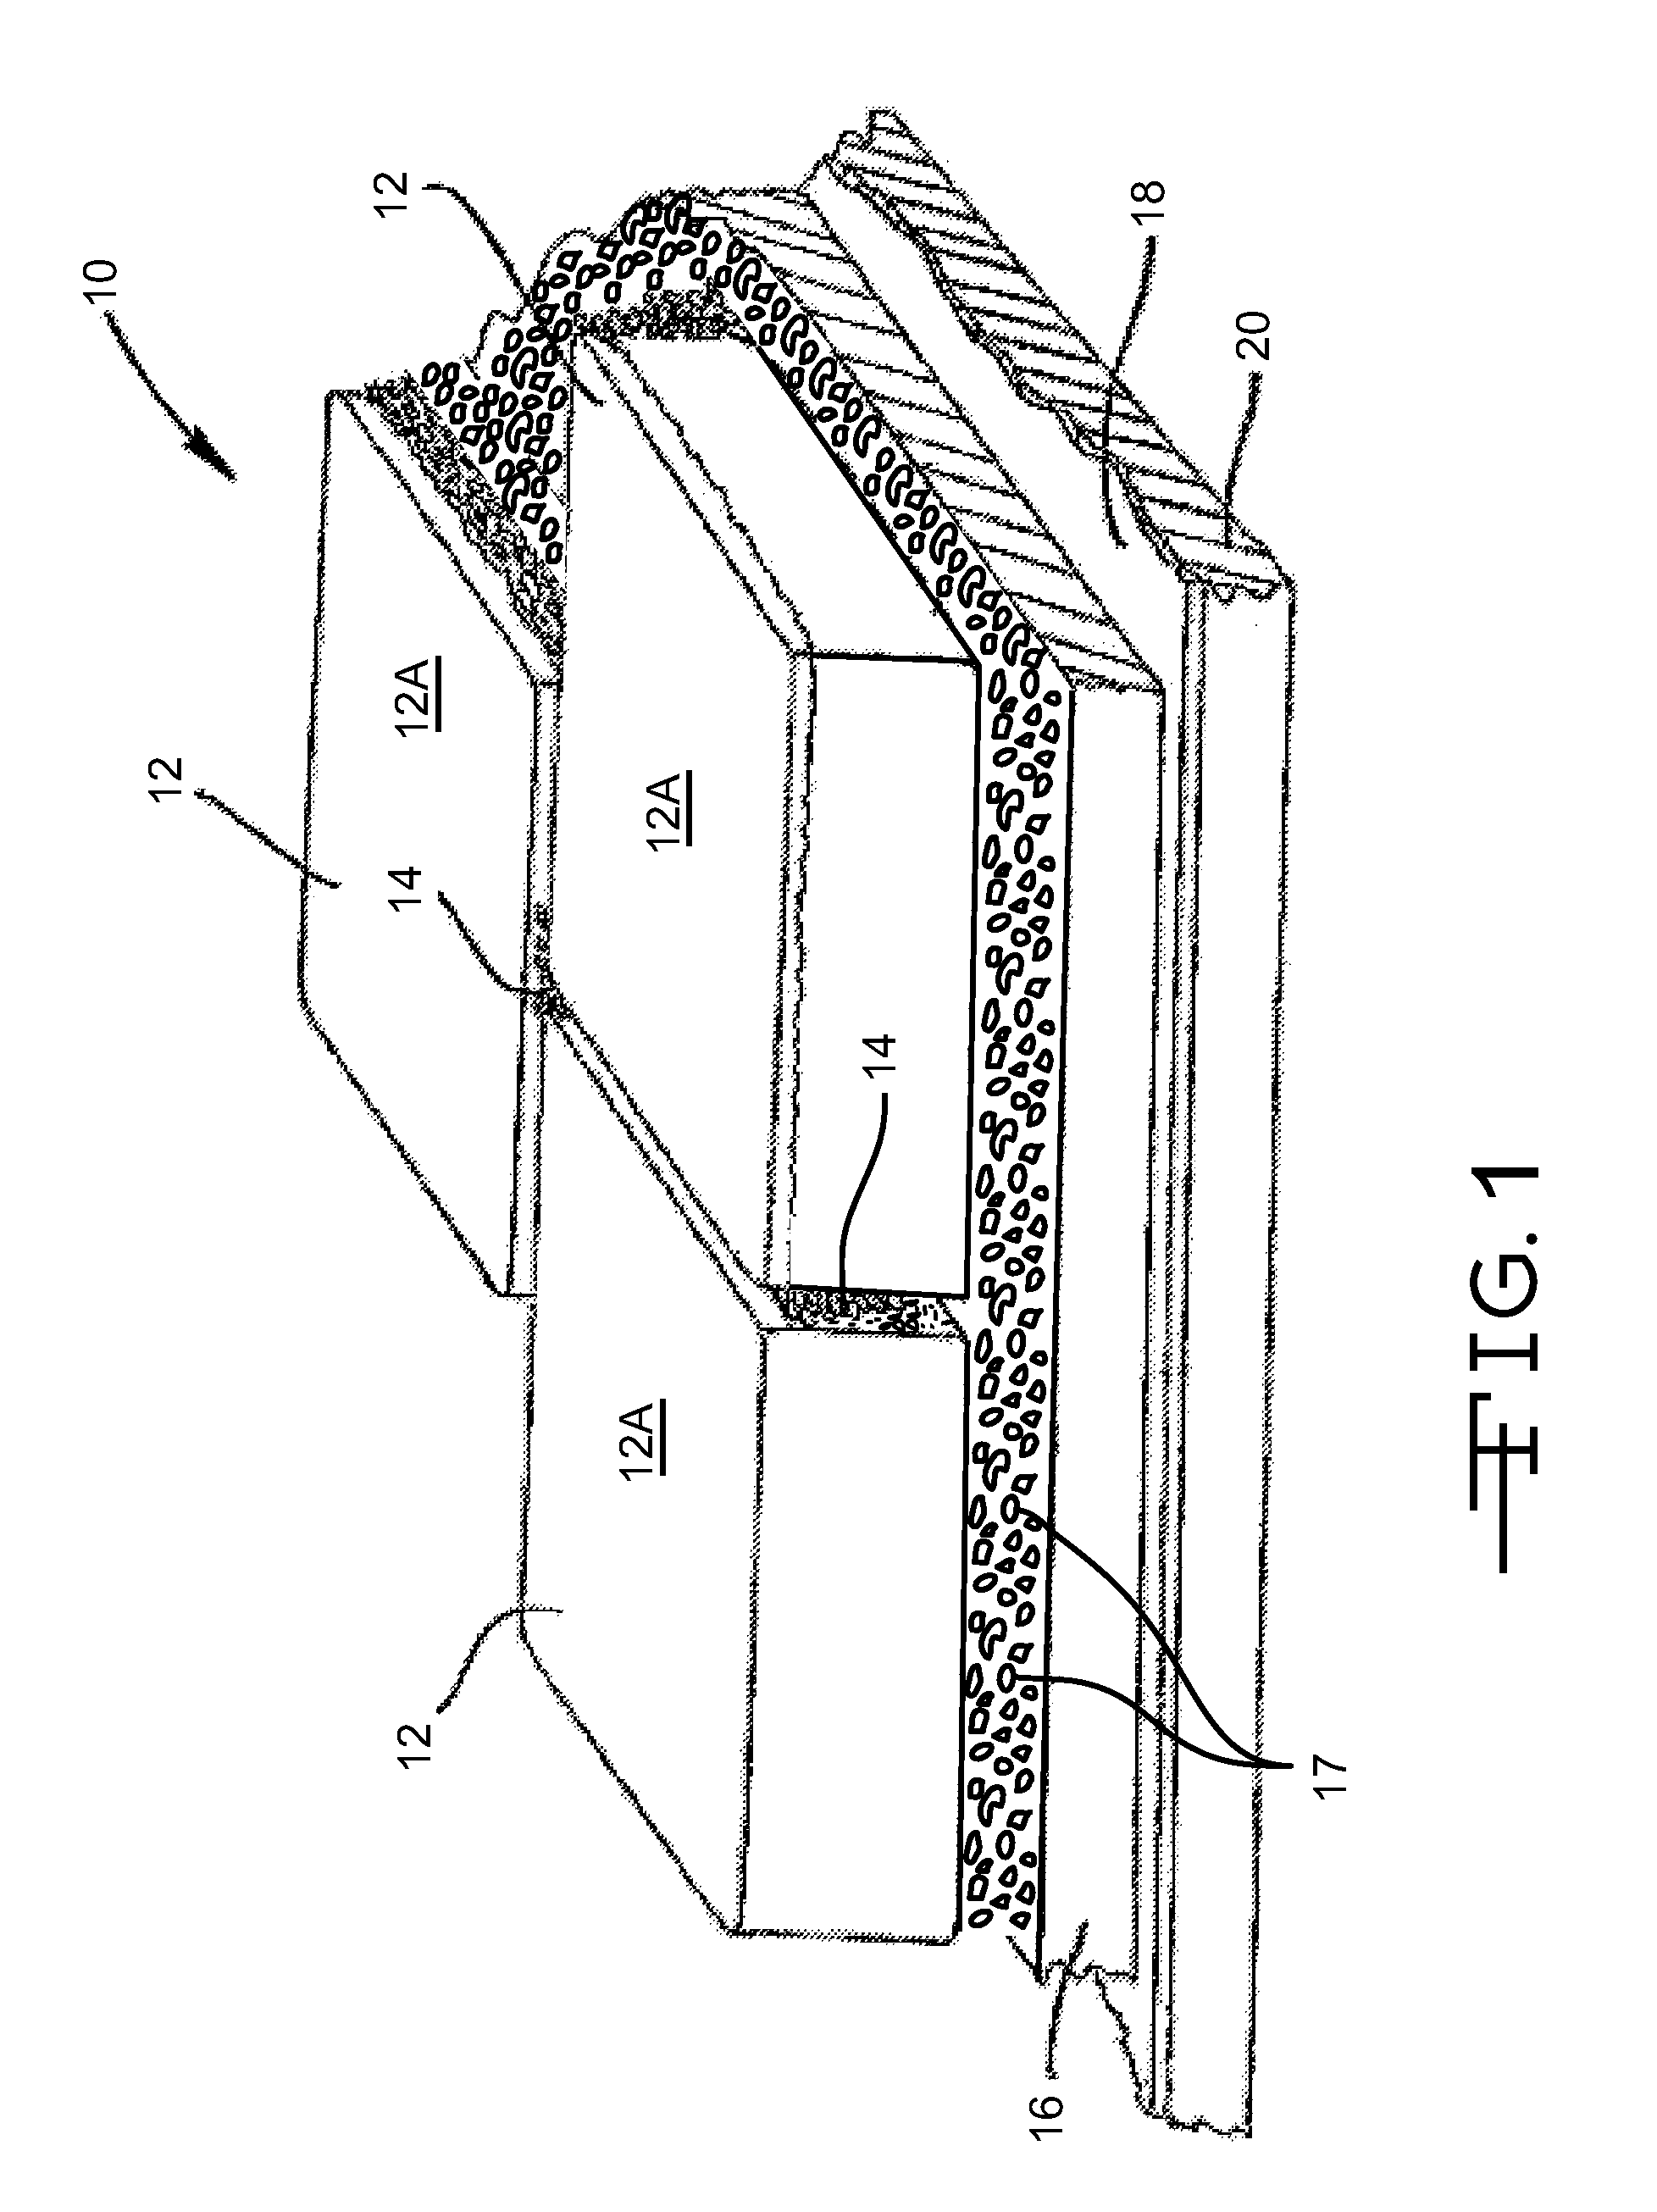 Structural underlayment support system for use with paving and flooring elements